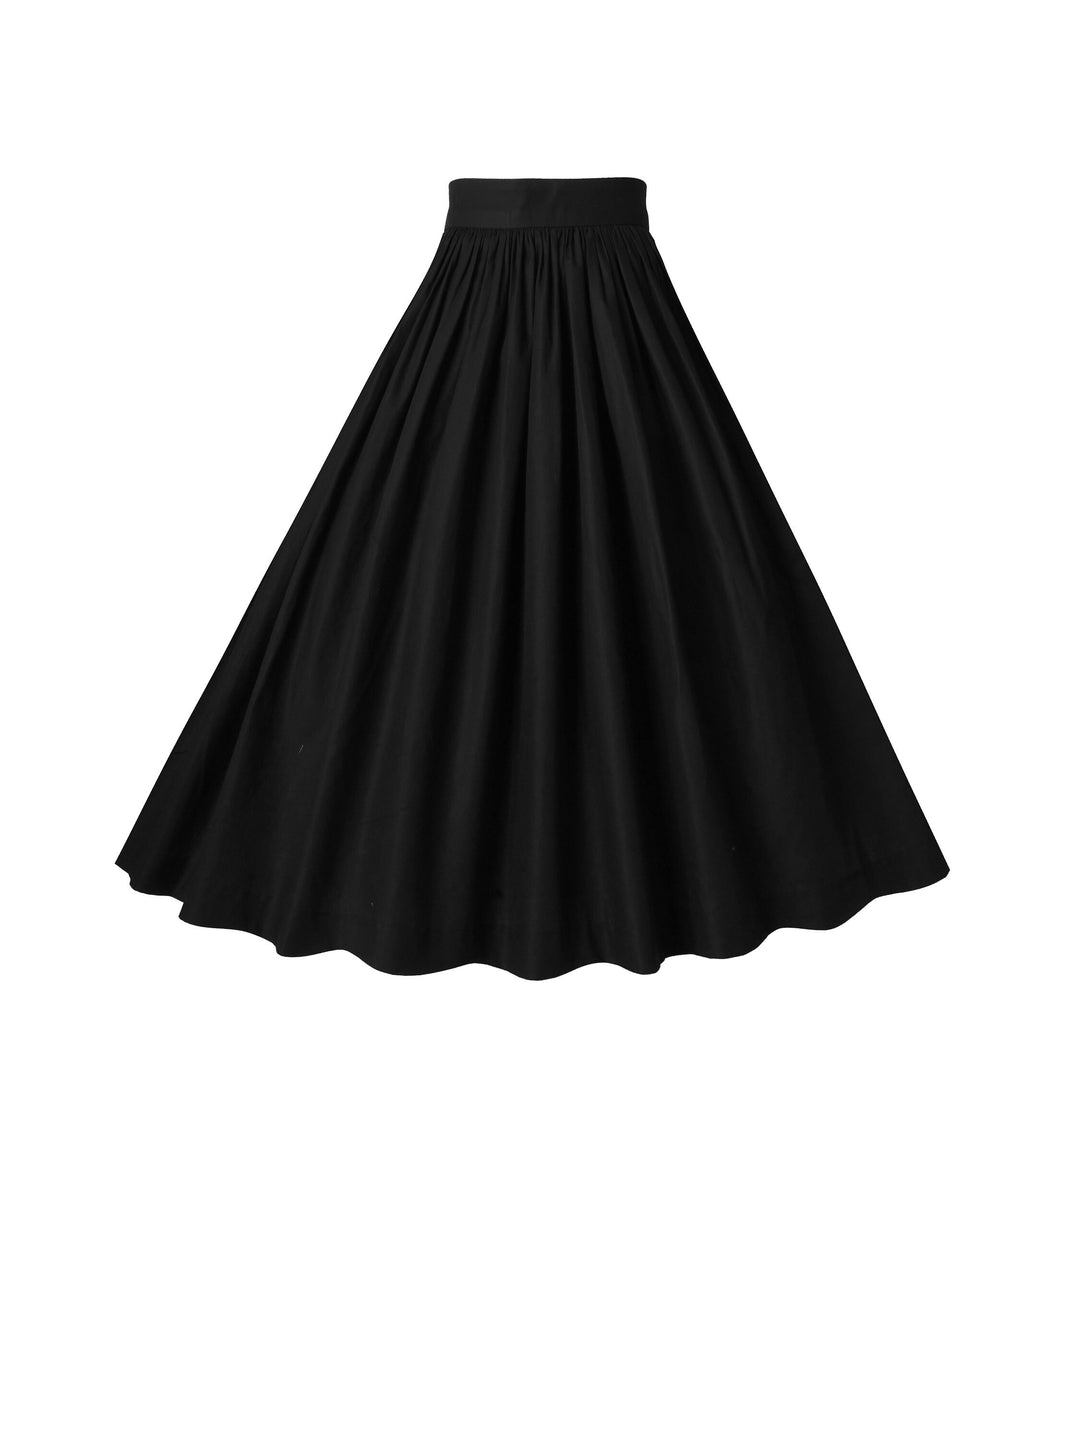 RTS - Size S - Lola Skirt in Raven Black Cotton